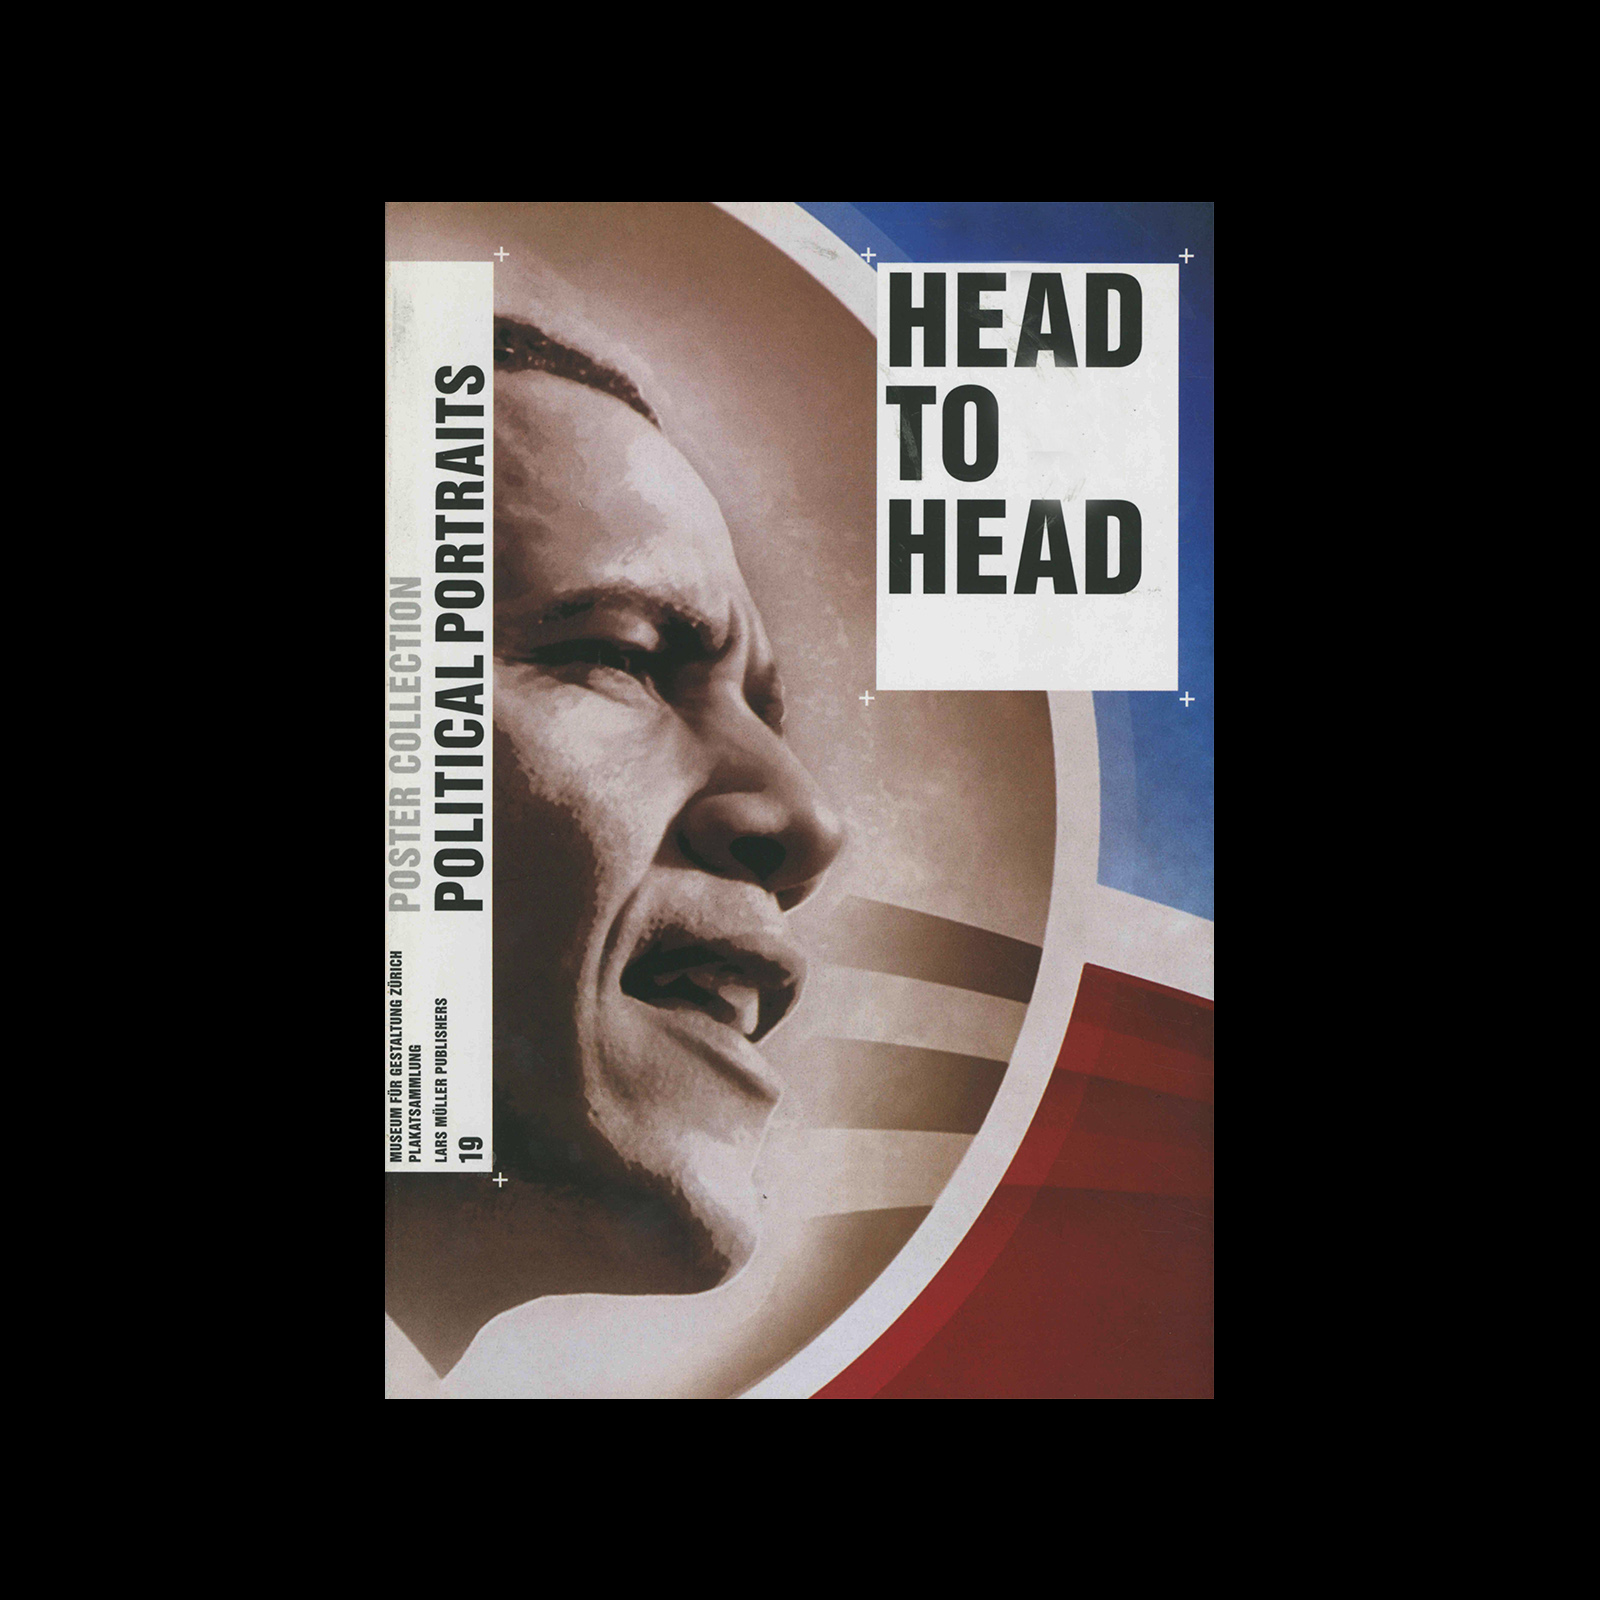 Head to Head, Poster Collection 19, 2009